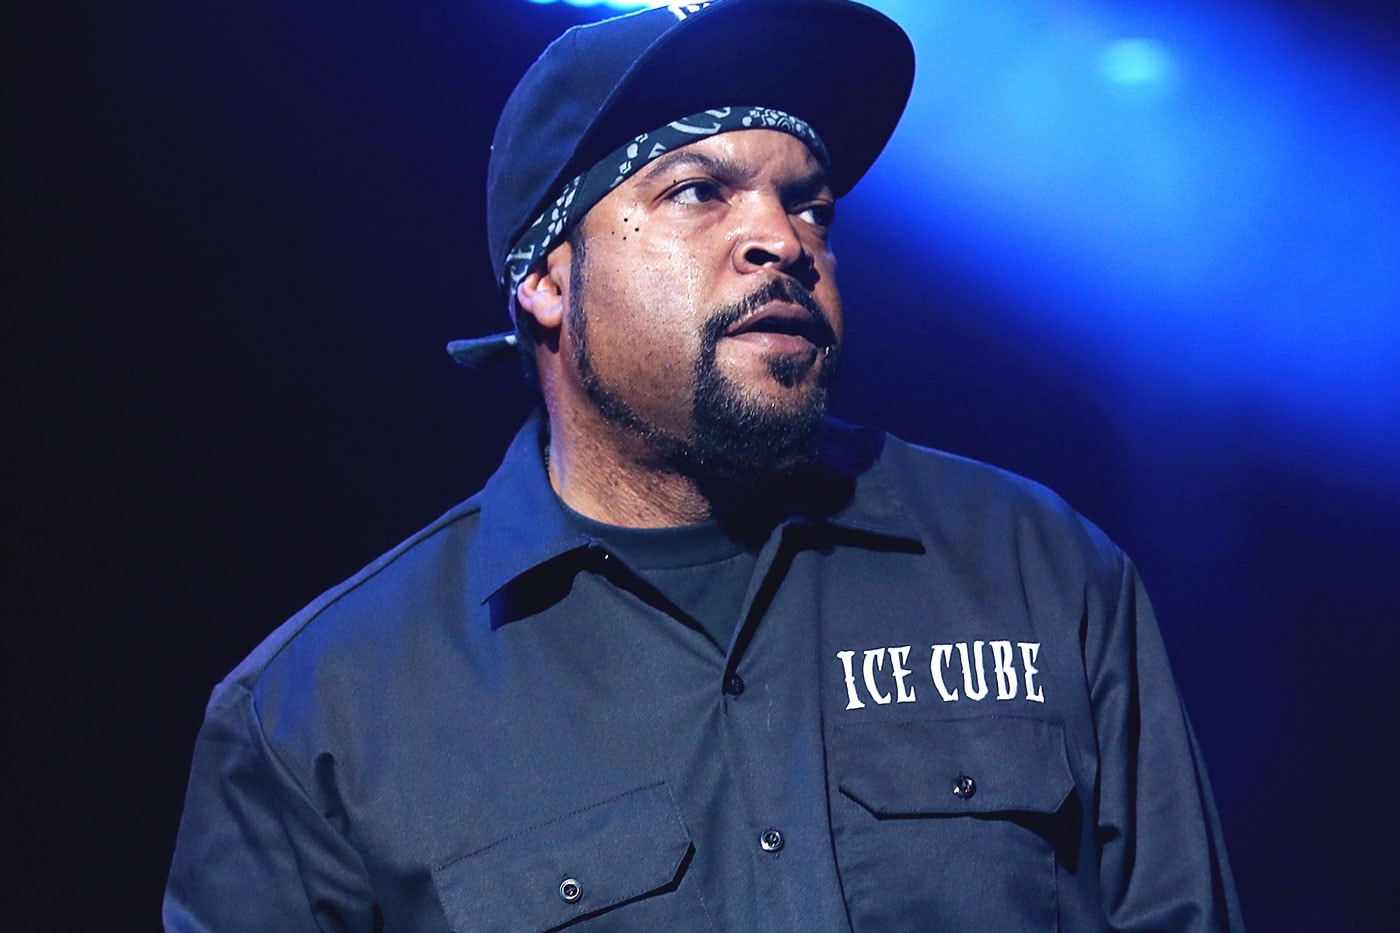 Ice Cube Says He Feels “No Emotions” About Jerry Heller’s Death